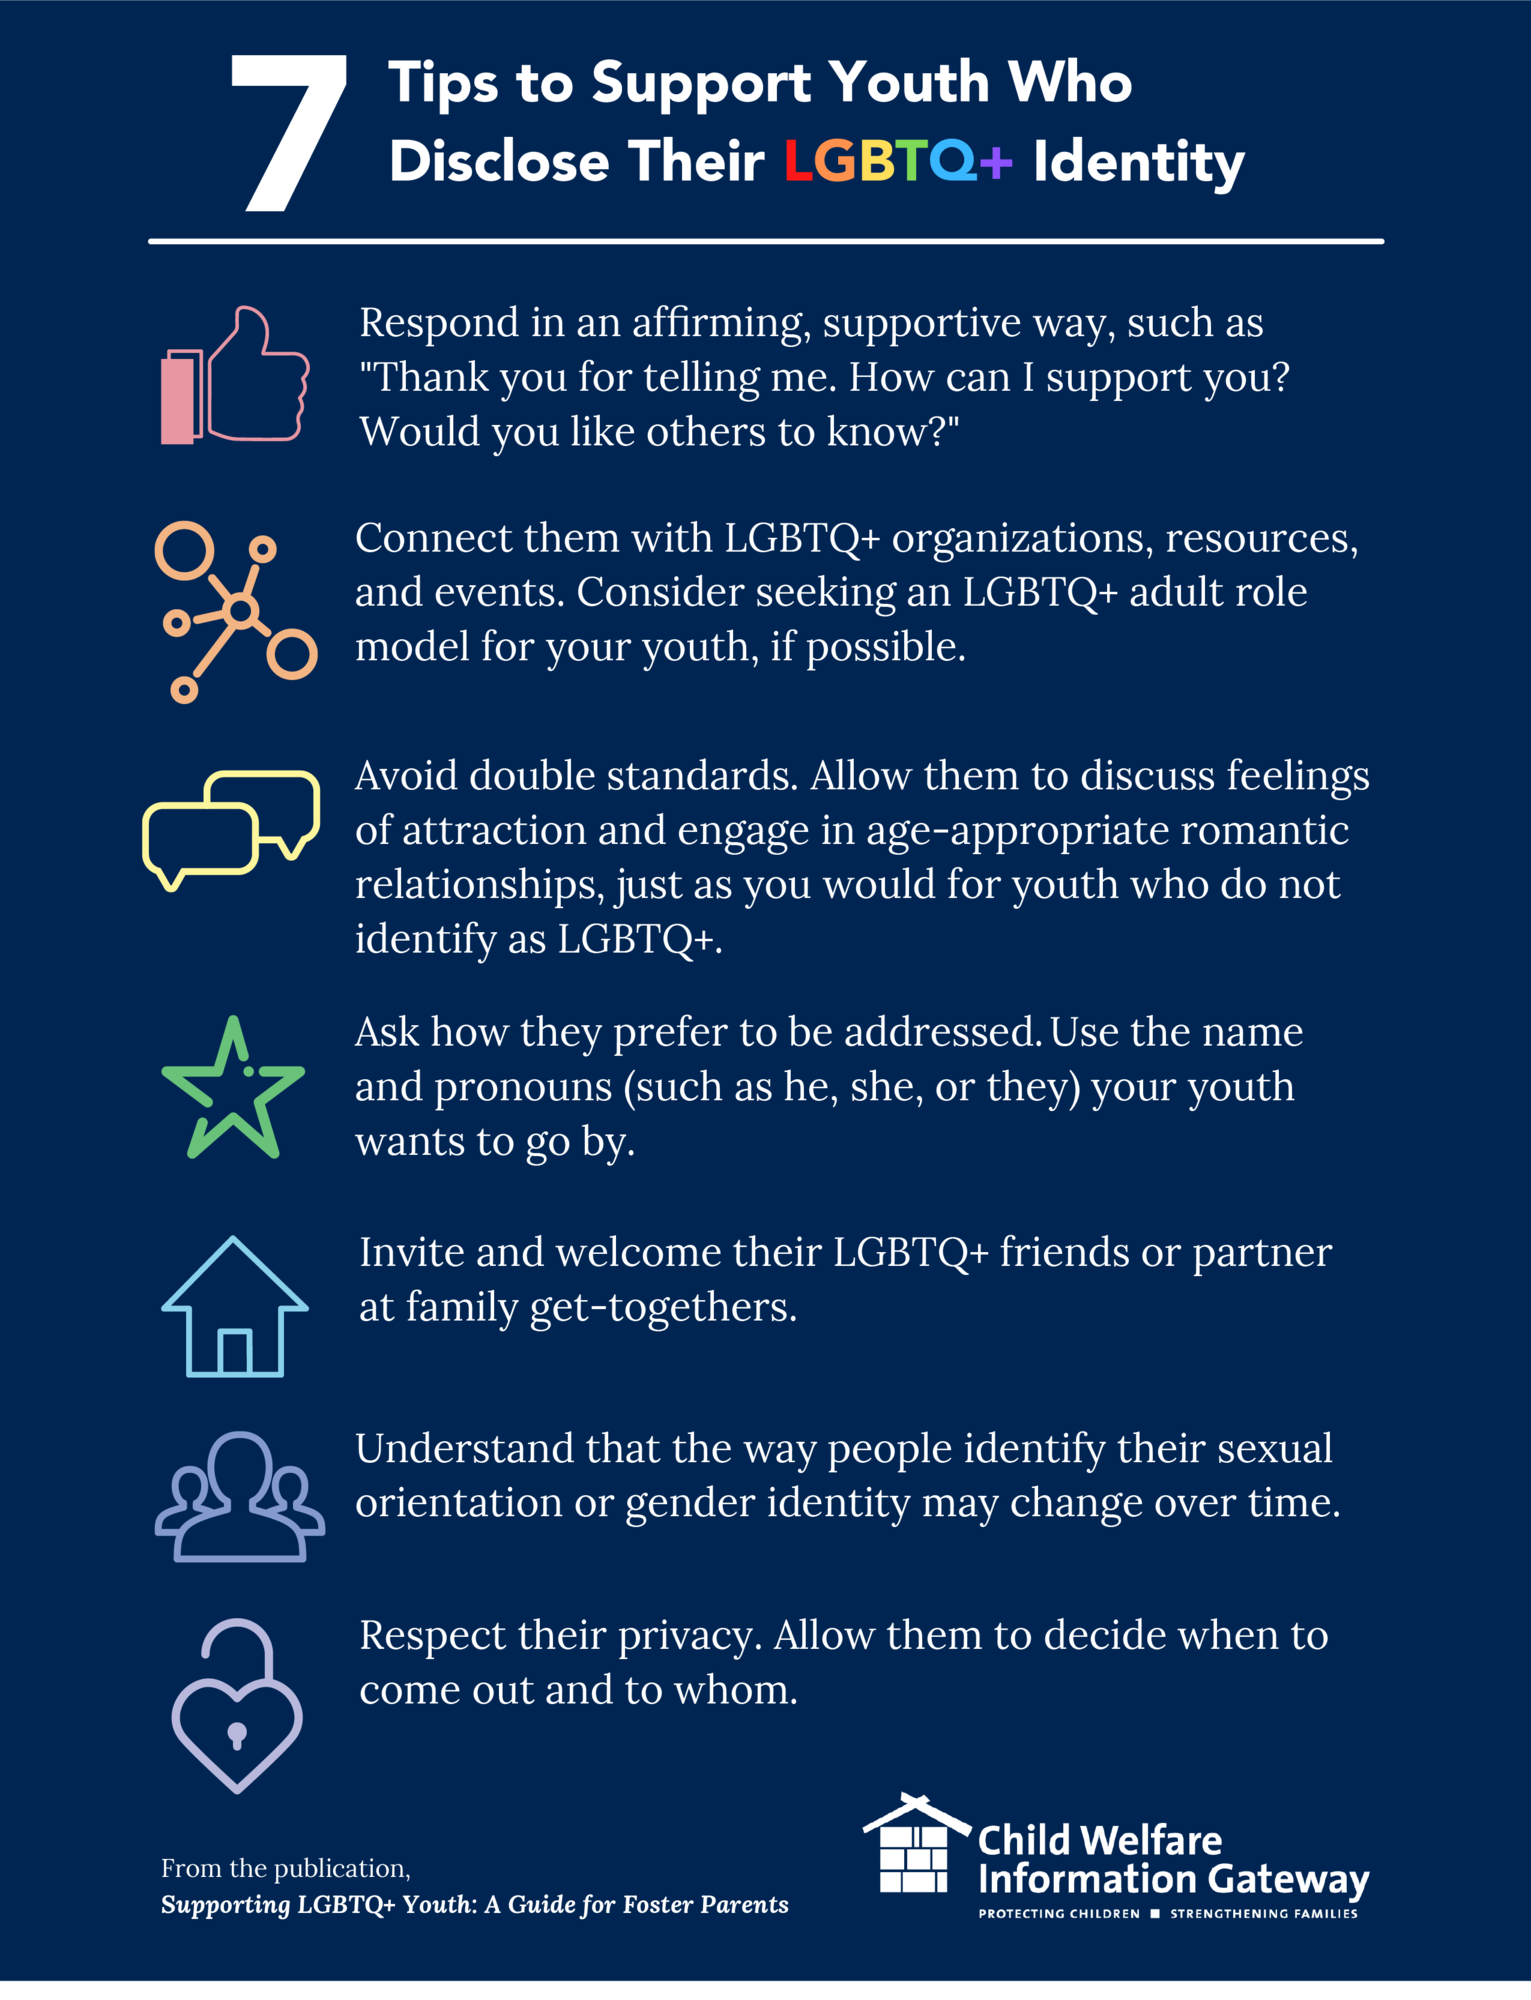 7 Tips to Support Youth Who Disclose Their LGBTQ+ Identity